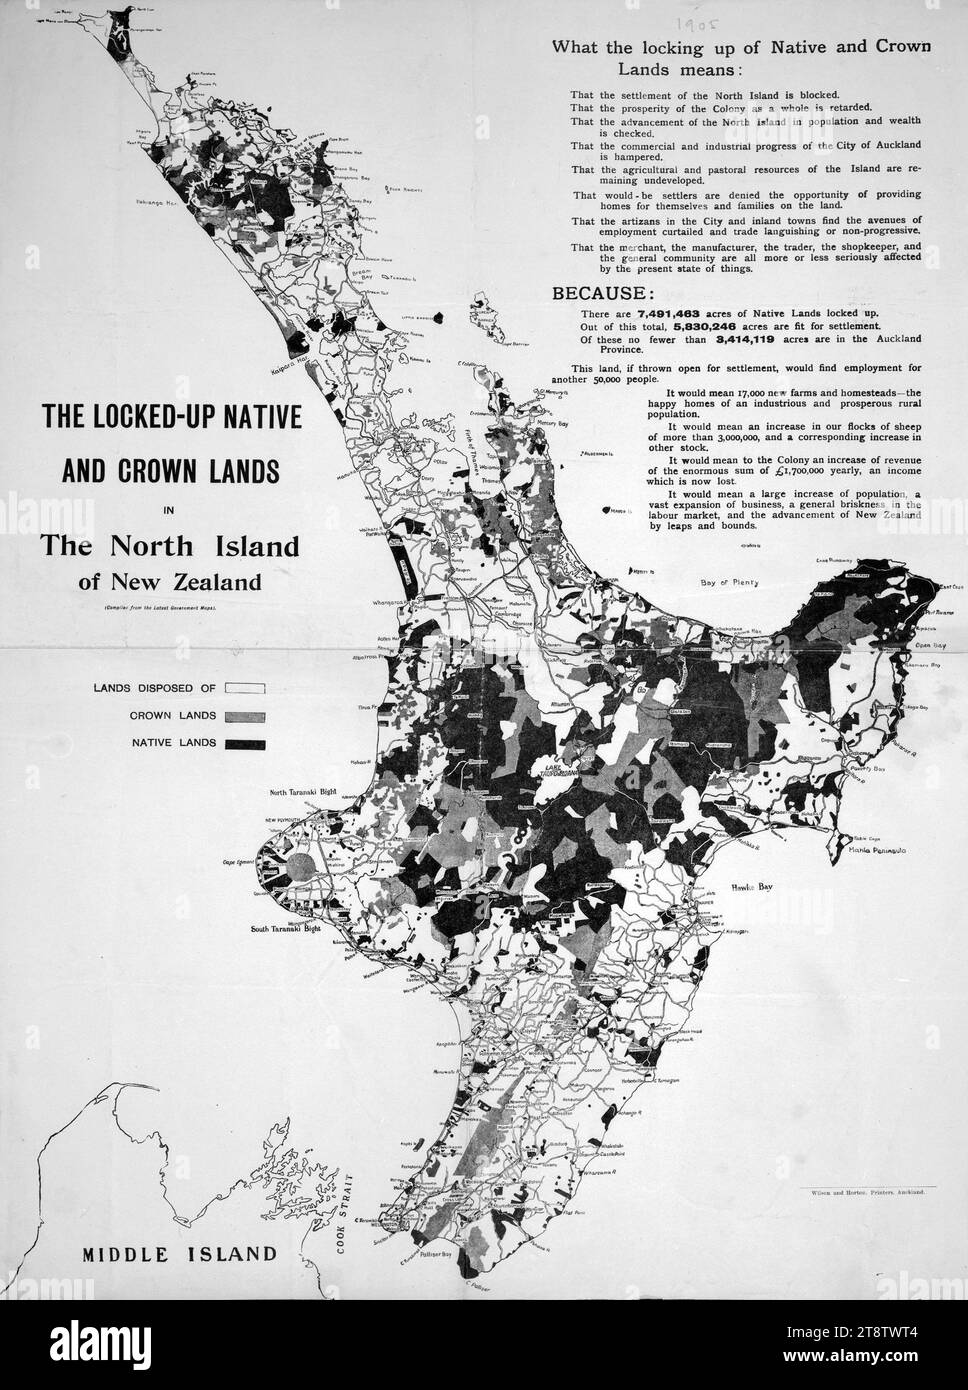 The locked-up native and crown lands in the North Island of New Zealand (compiled from the latest Government maps). 1905, Shows a map of the North Island with shading for Lands disposed of, Crown lands, and Native lands. The text argues that the locking-up of native and crown lands means that settlement is blocked, prosperity is retarded, commercial and industrial progress is hampered, agricultural and pastoral resources are remaining undeveloped, would-be settlers cannot find homes, and merchants and traders and the general community is seriously affected. Stock Photo